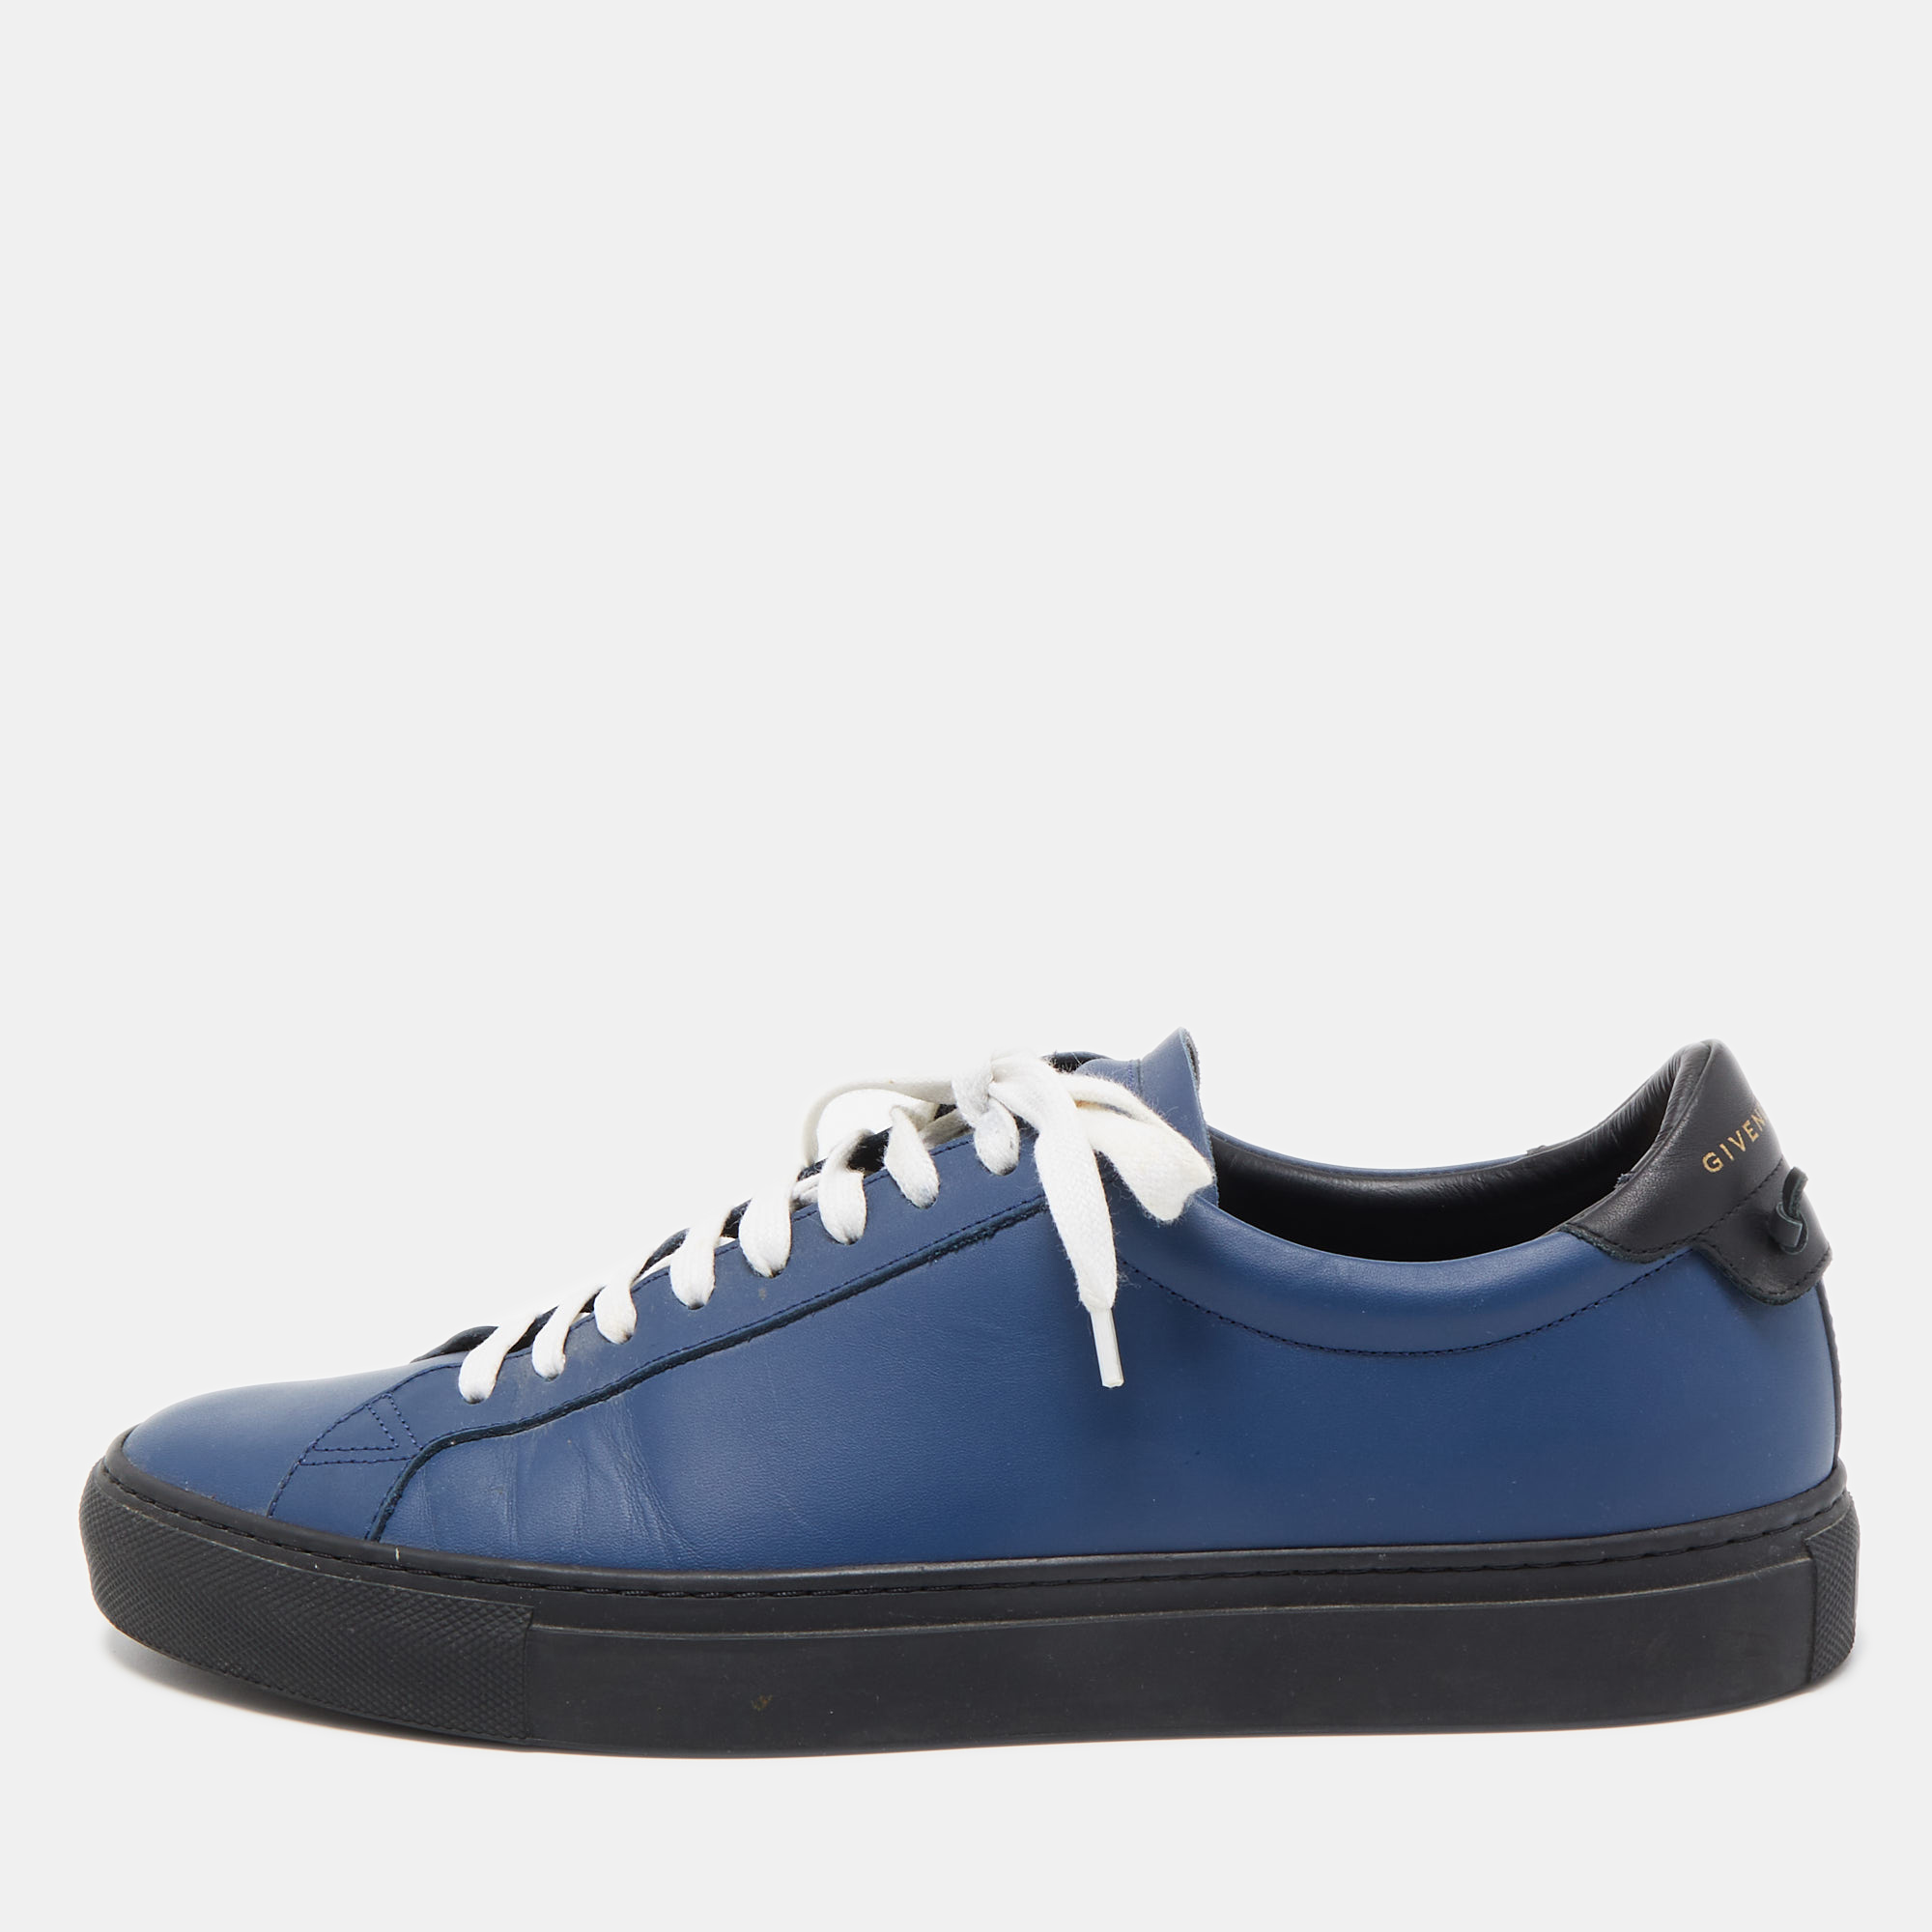 Givenchy Blue Leather Lace Up Sneakers Size 42